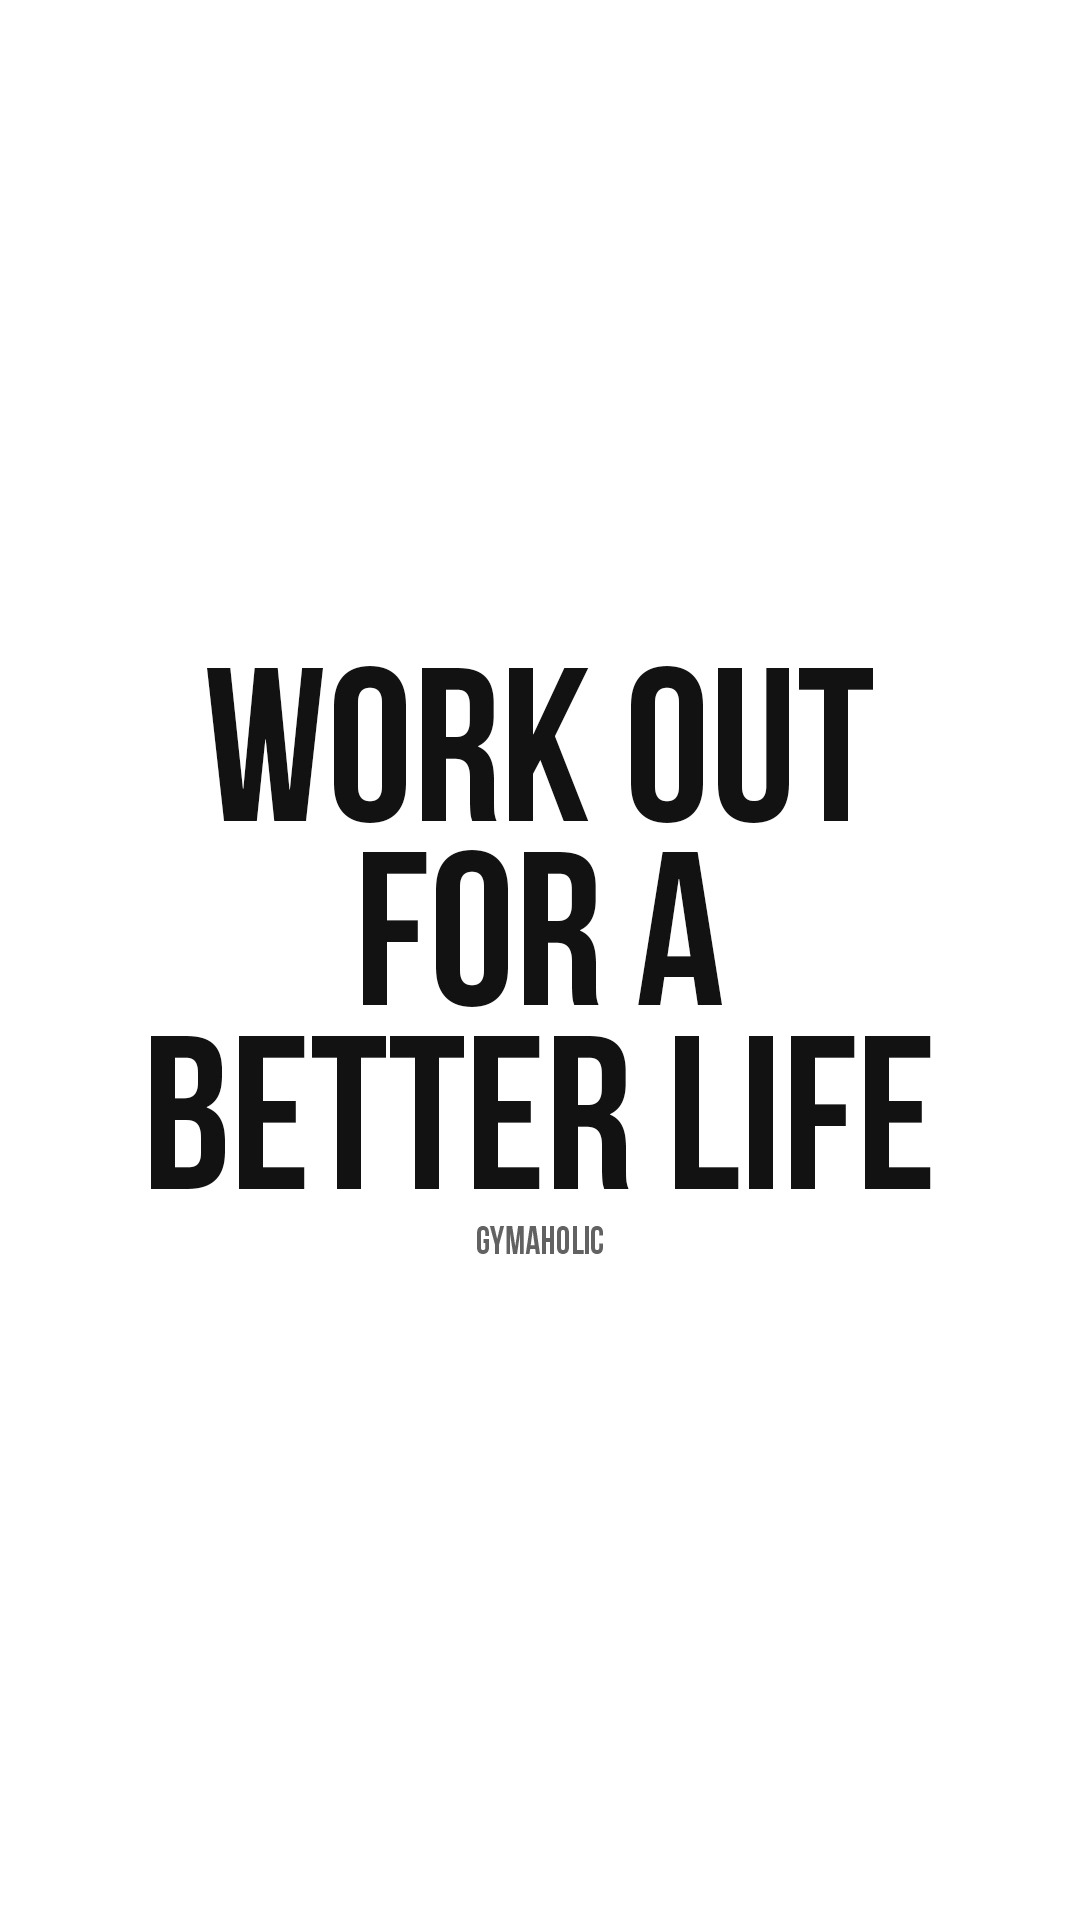 Work out for a better life